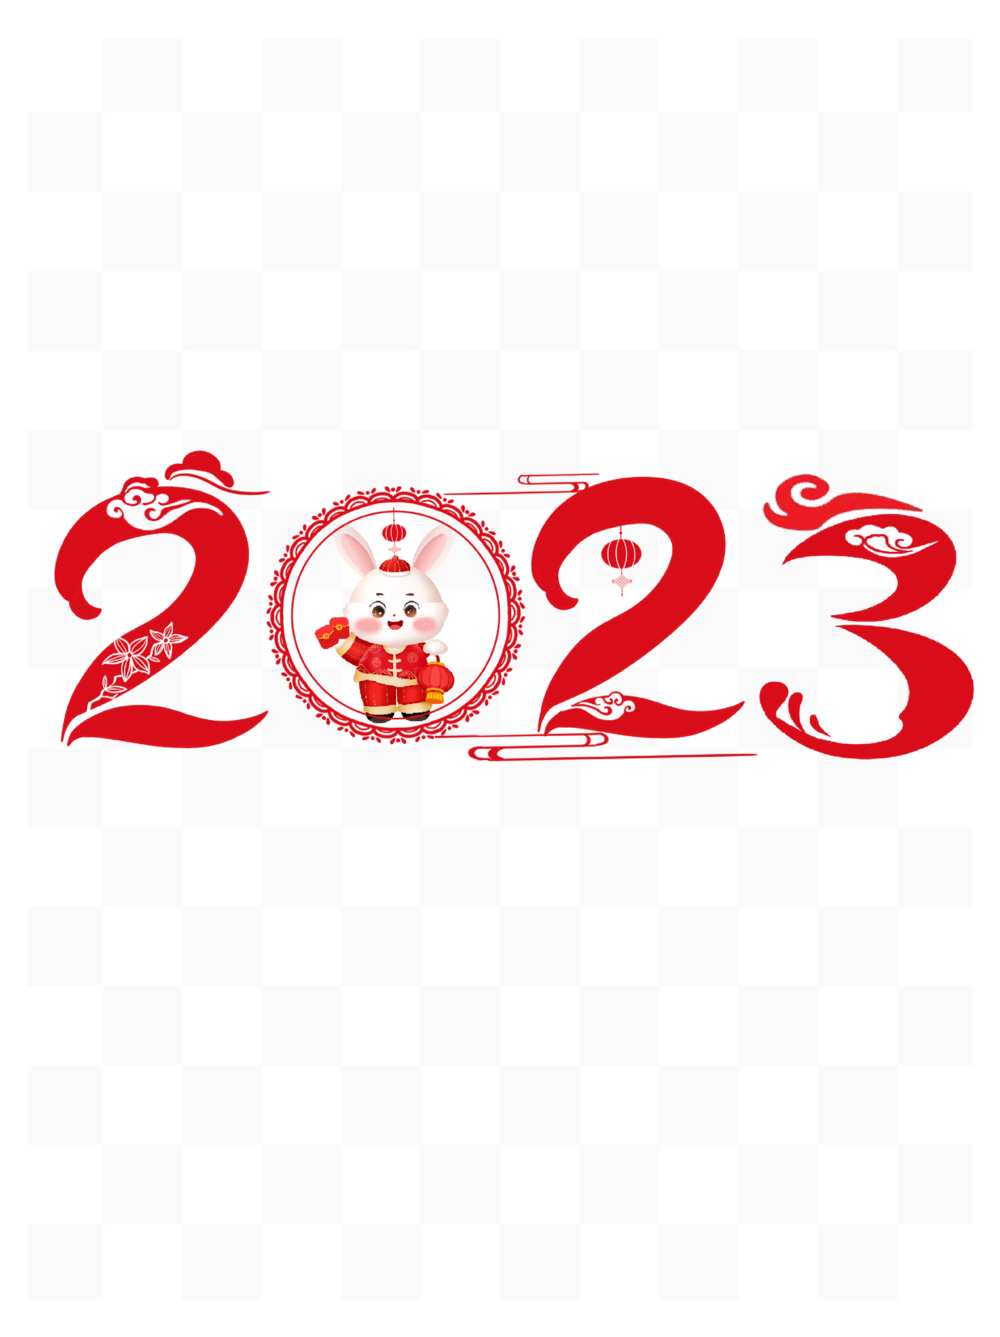 Greetings for Chinese New Year 2023